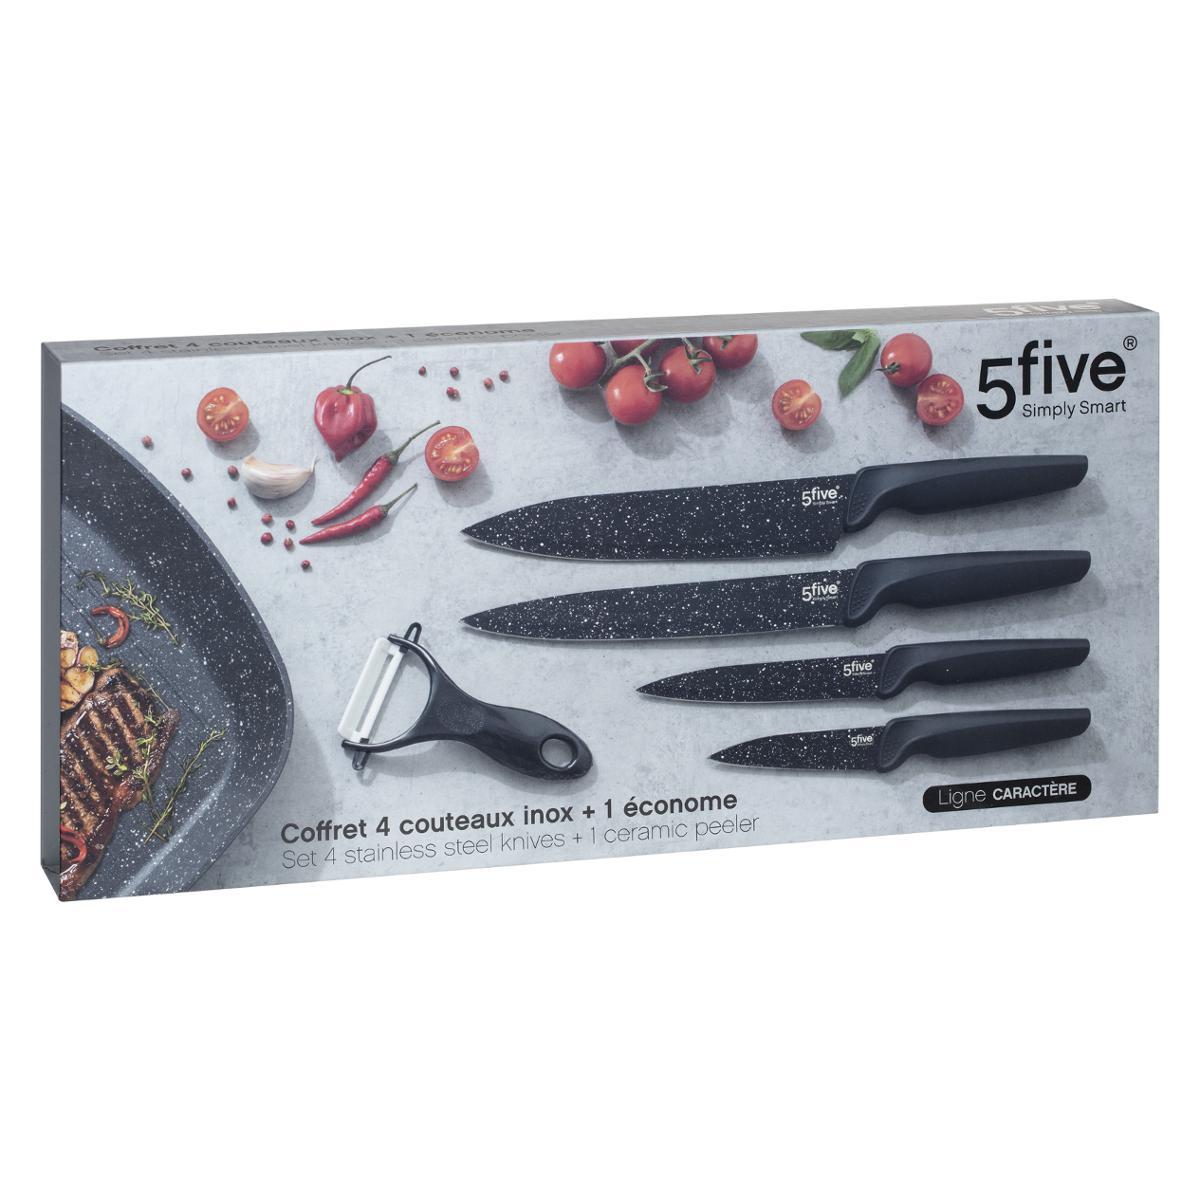 Five simply smart Stainless Kitchen Knife 28.5 cm Silver